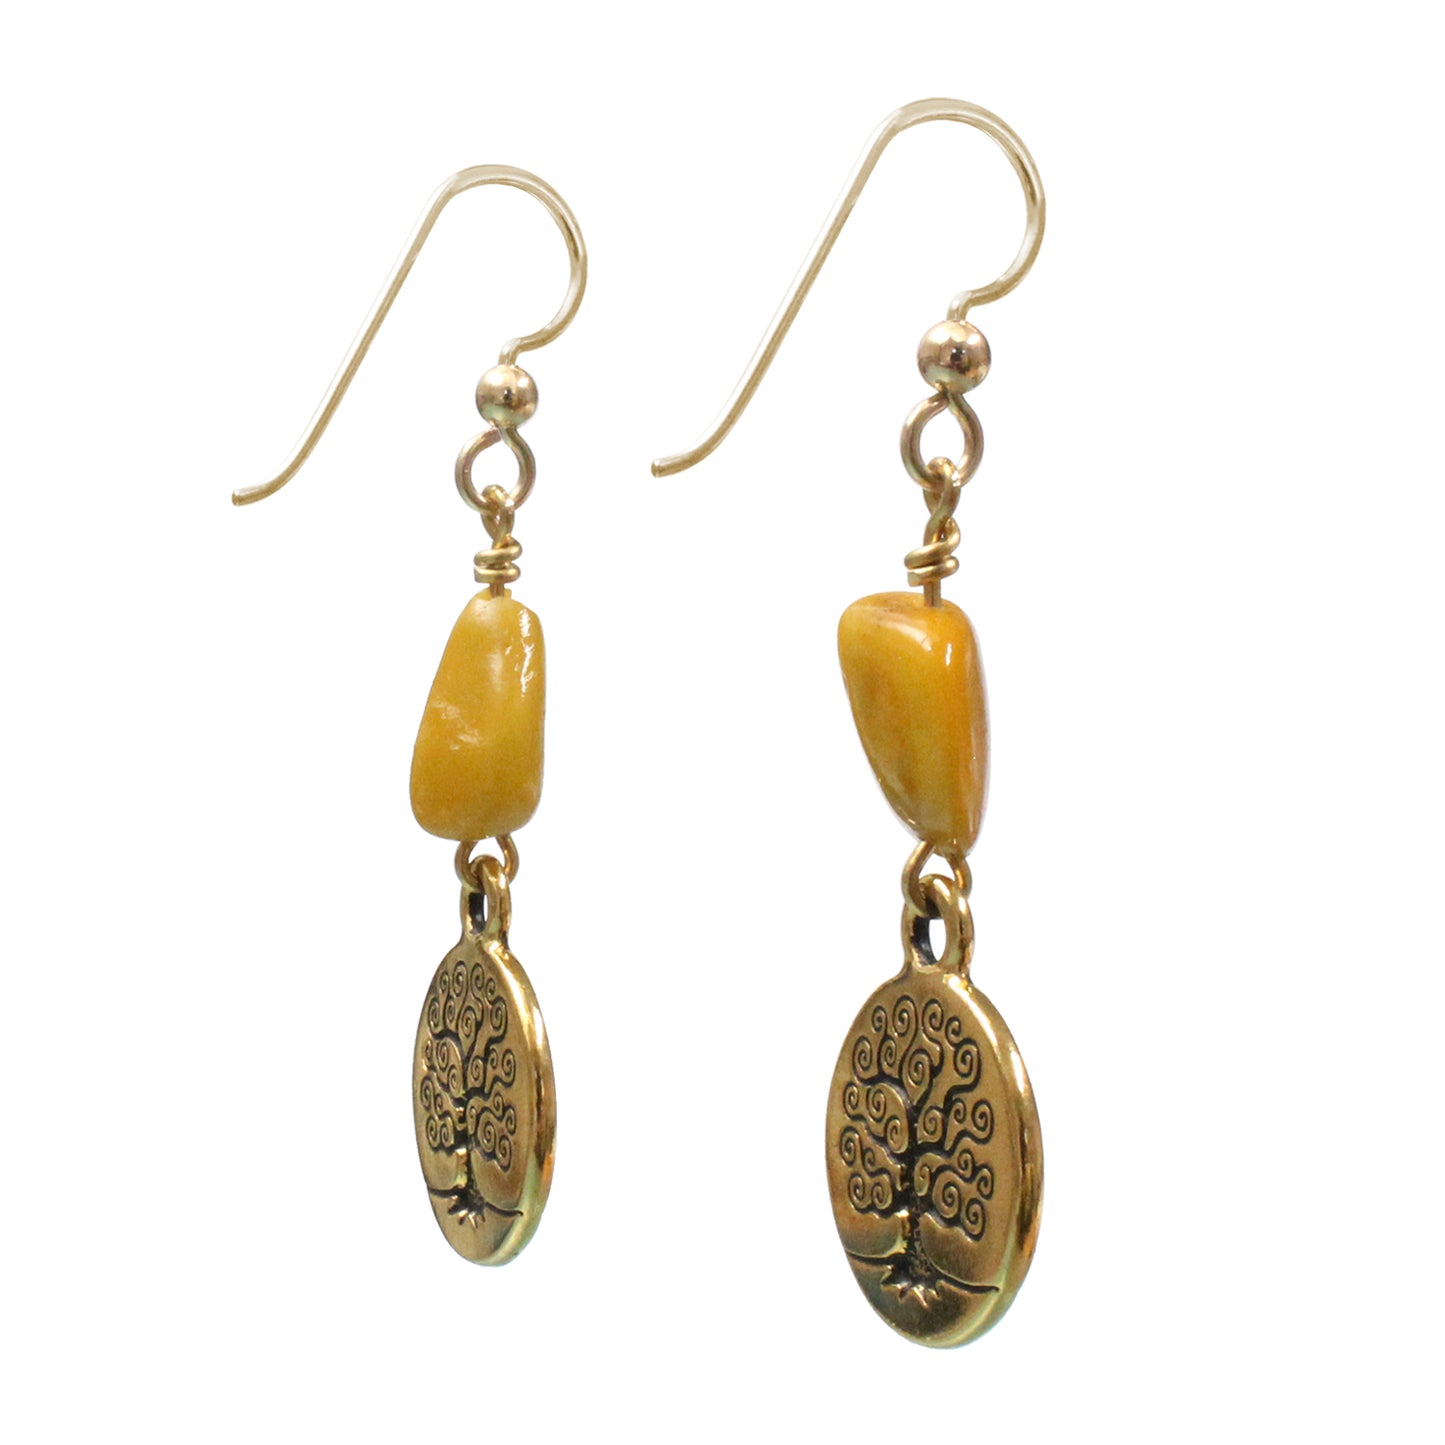 Tree of Life Amber Earrings / 50mm length / gold filled earwires